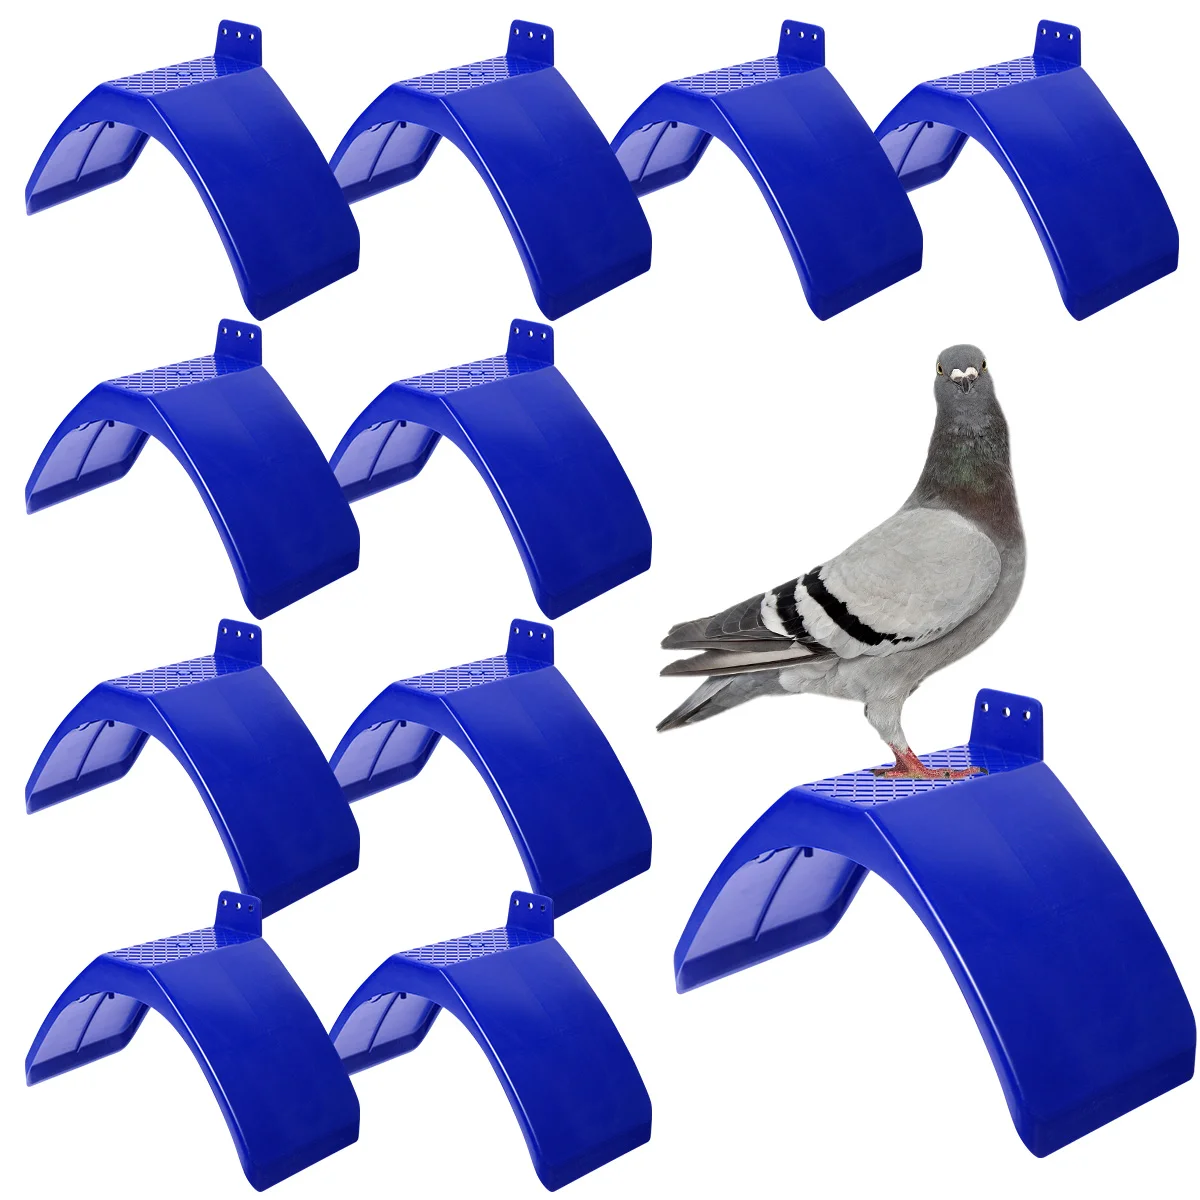 

POPETPOP 10pcs Plastic Pigeon Perch Dove Rest Stand Dwelling Supplies for Birds Swallow Pigeon (Blue)